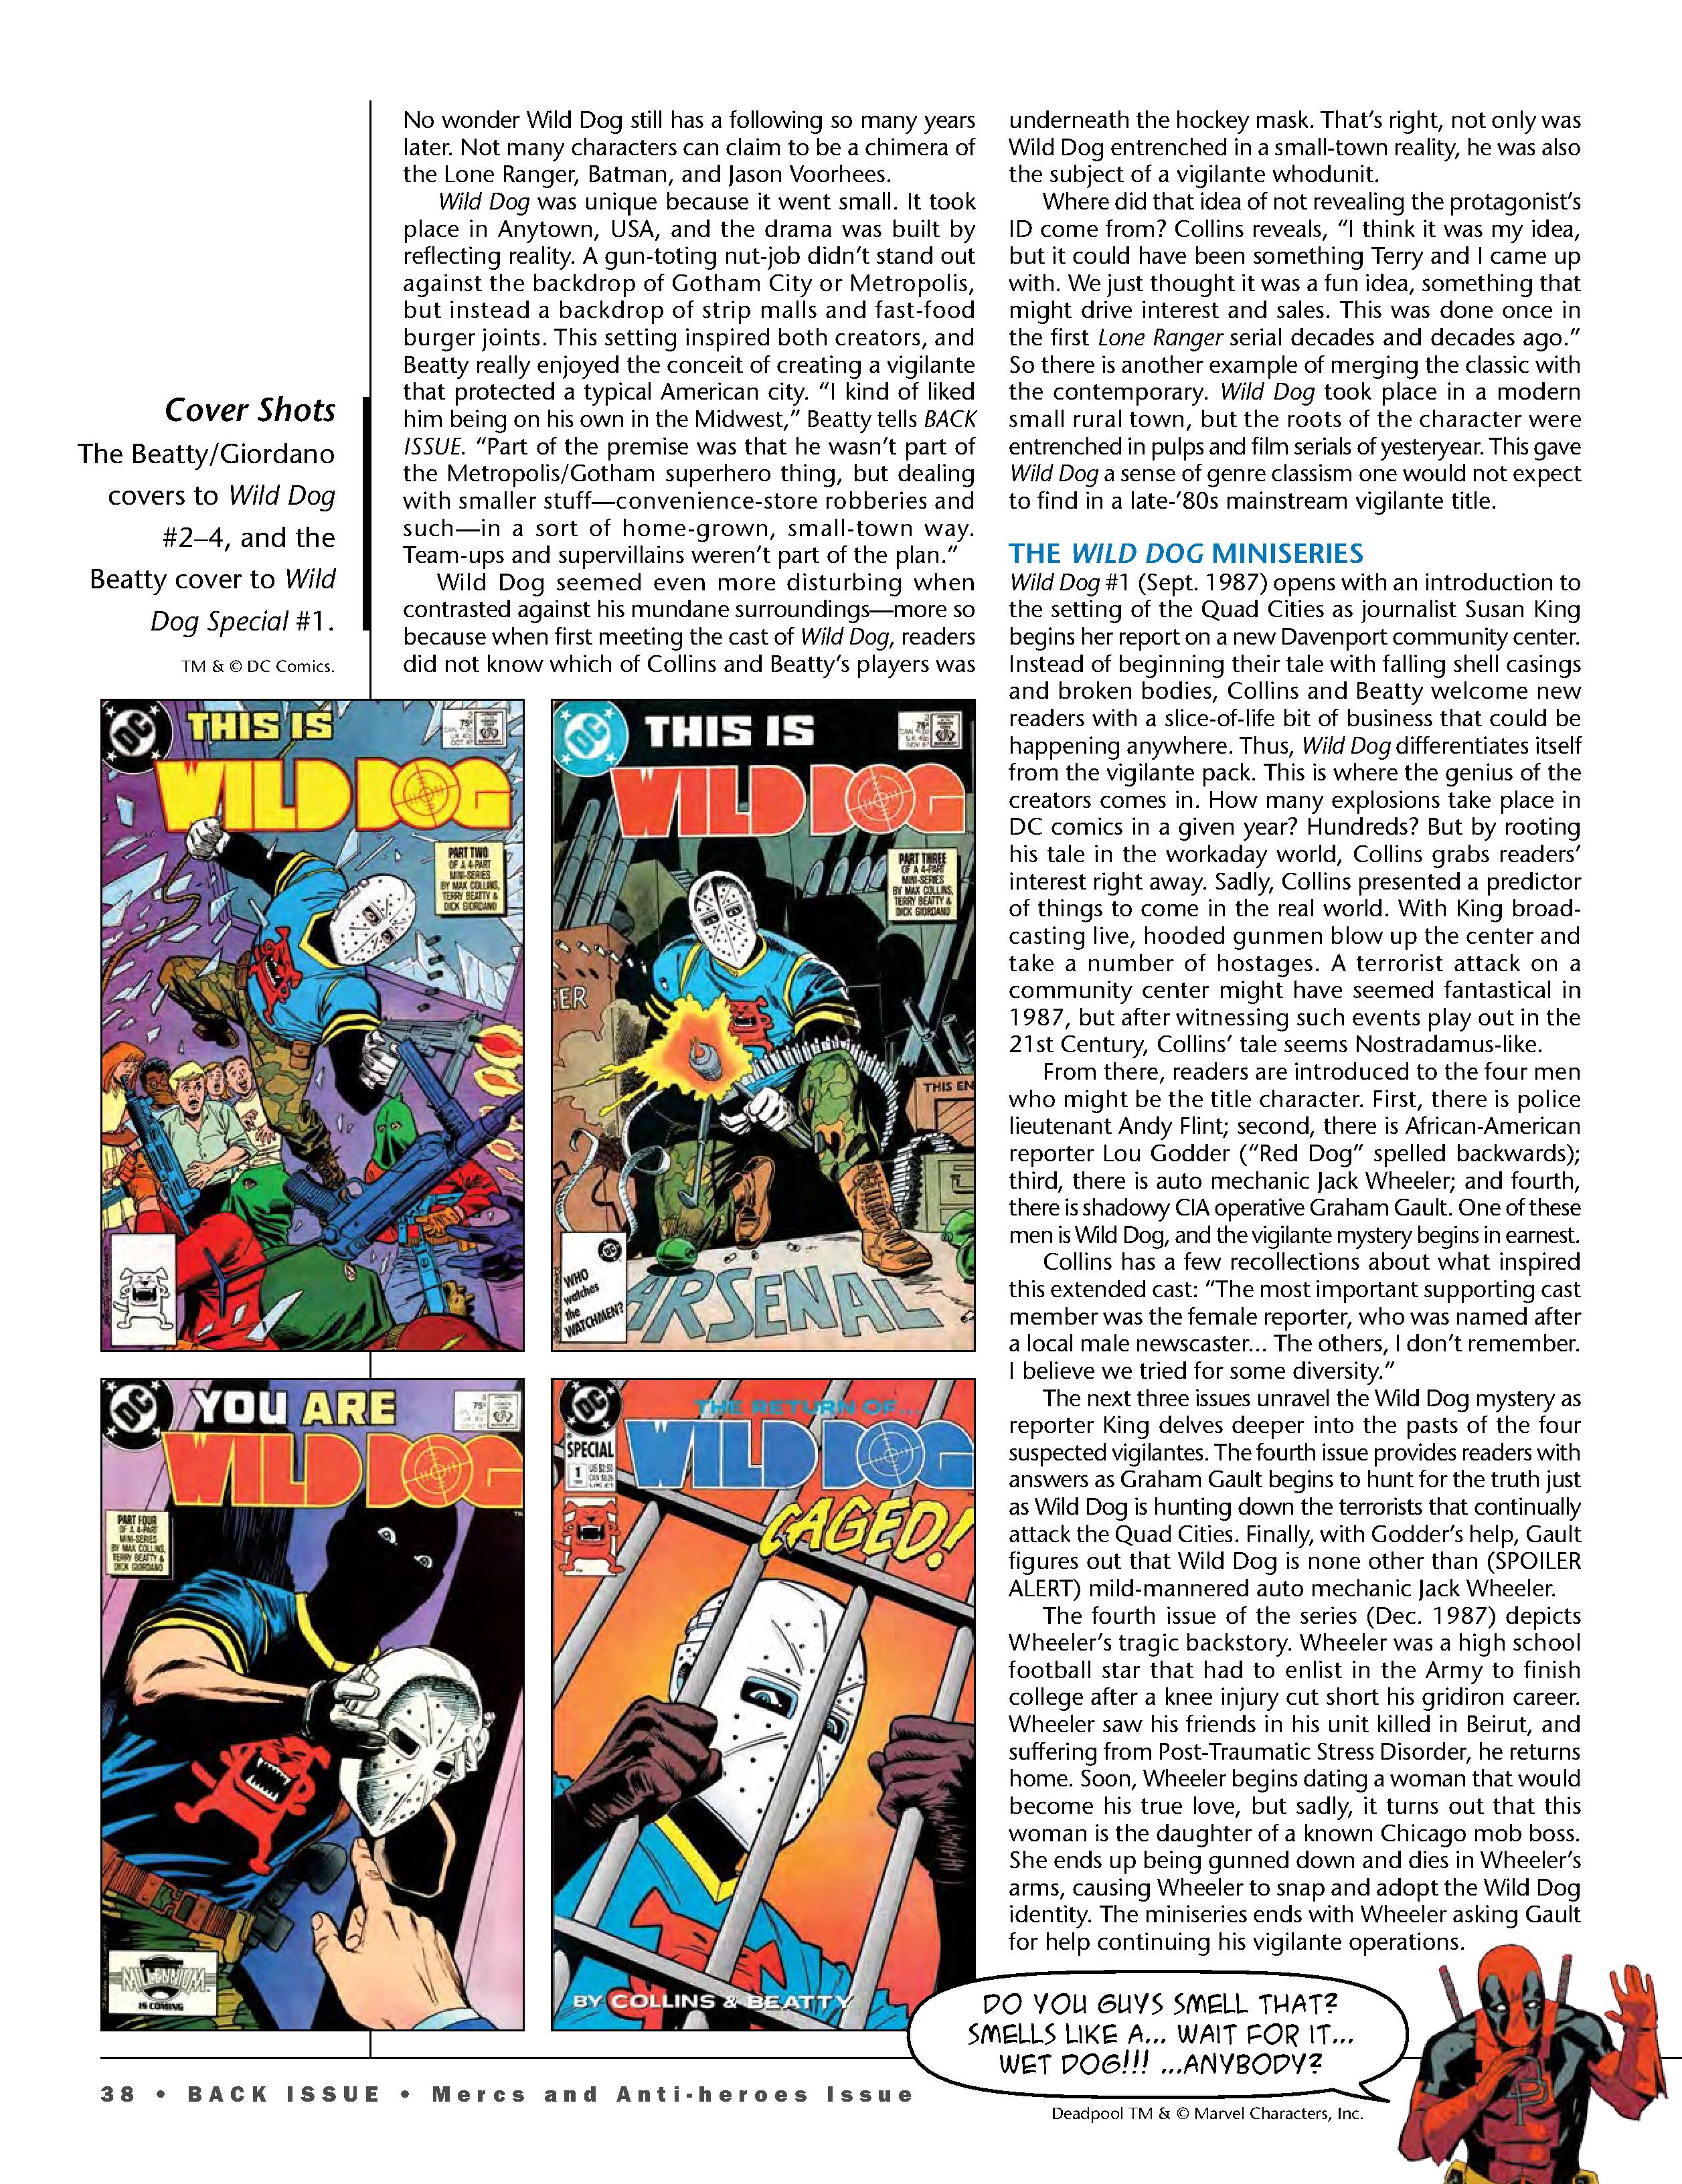 Read online Back Issue comic -  Issue #102 - 40